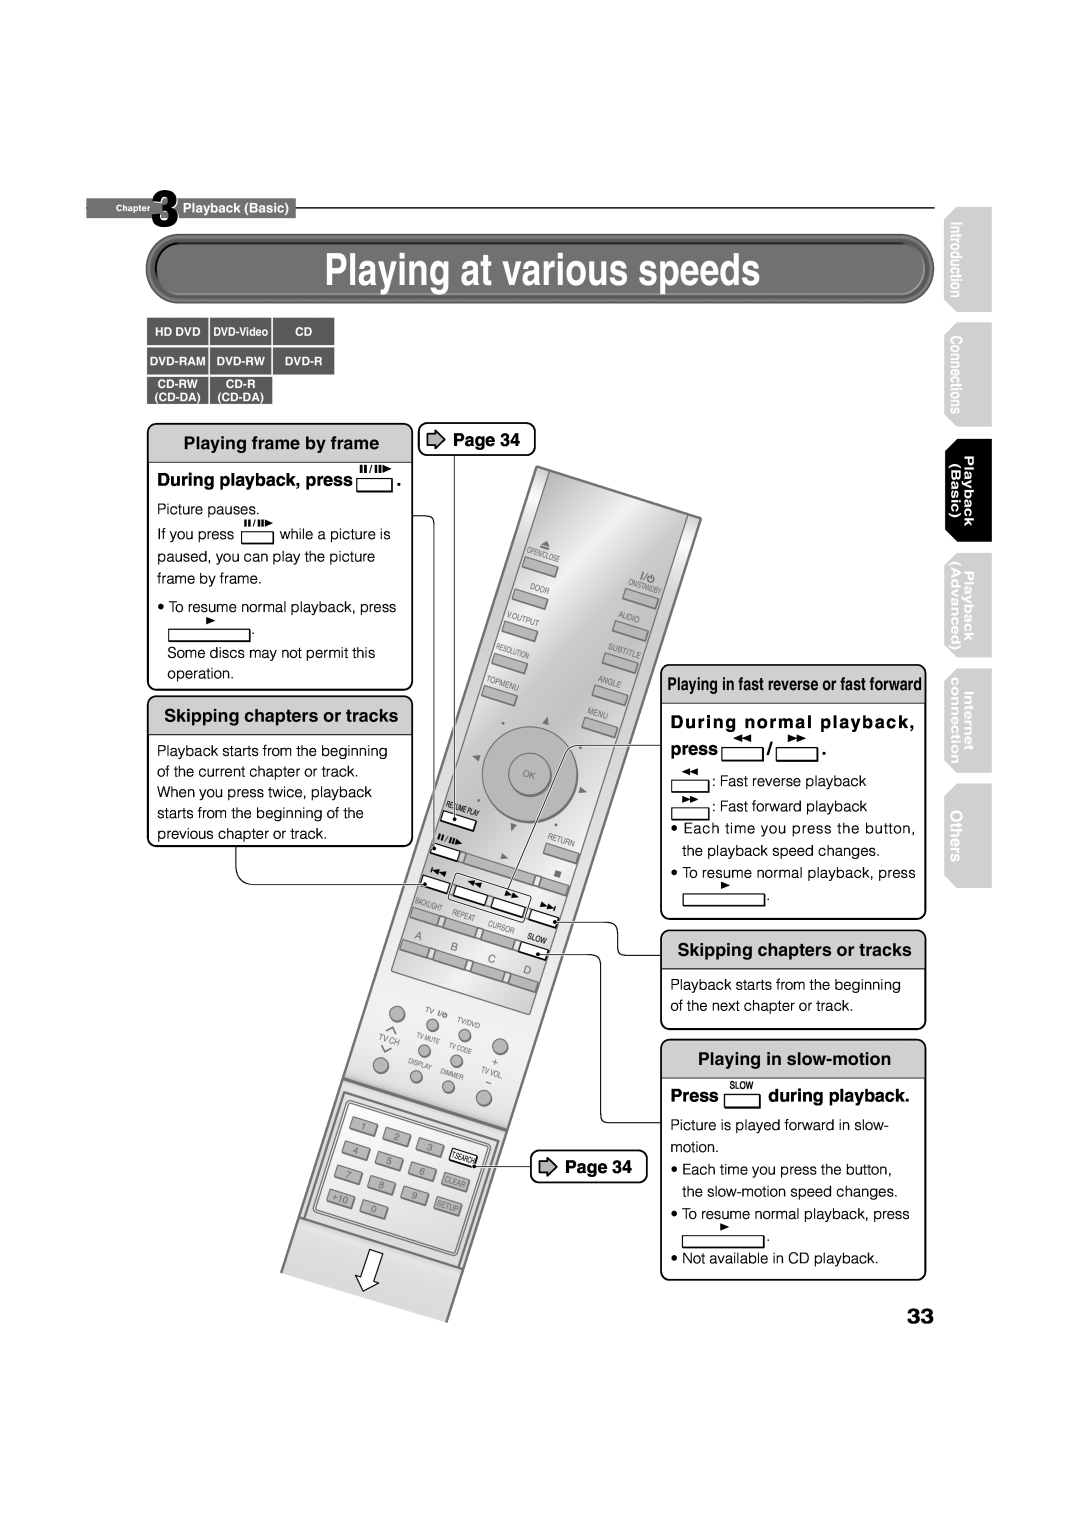 Toshiba HD-A1 Playing at various speeds, Playing frame by frame, Page, During playback, press, Skipping chapters or tracks 